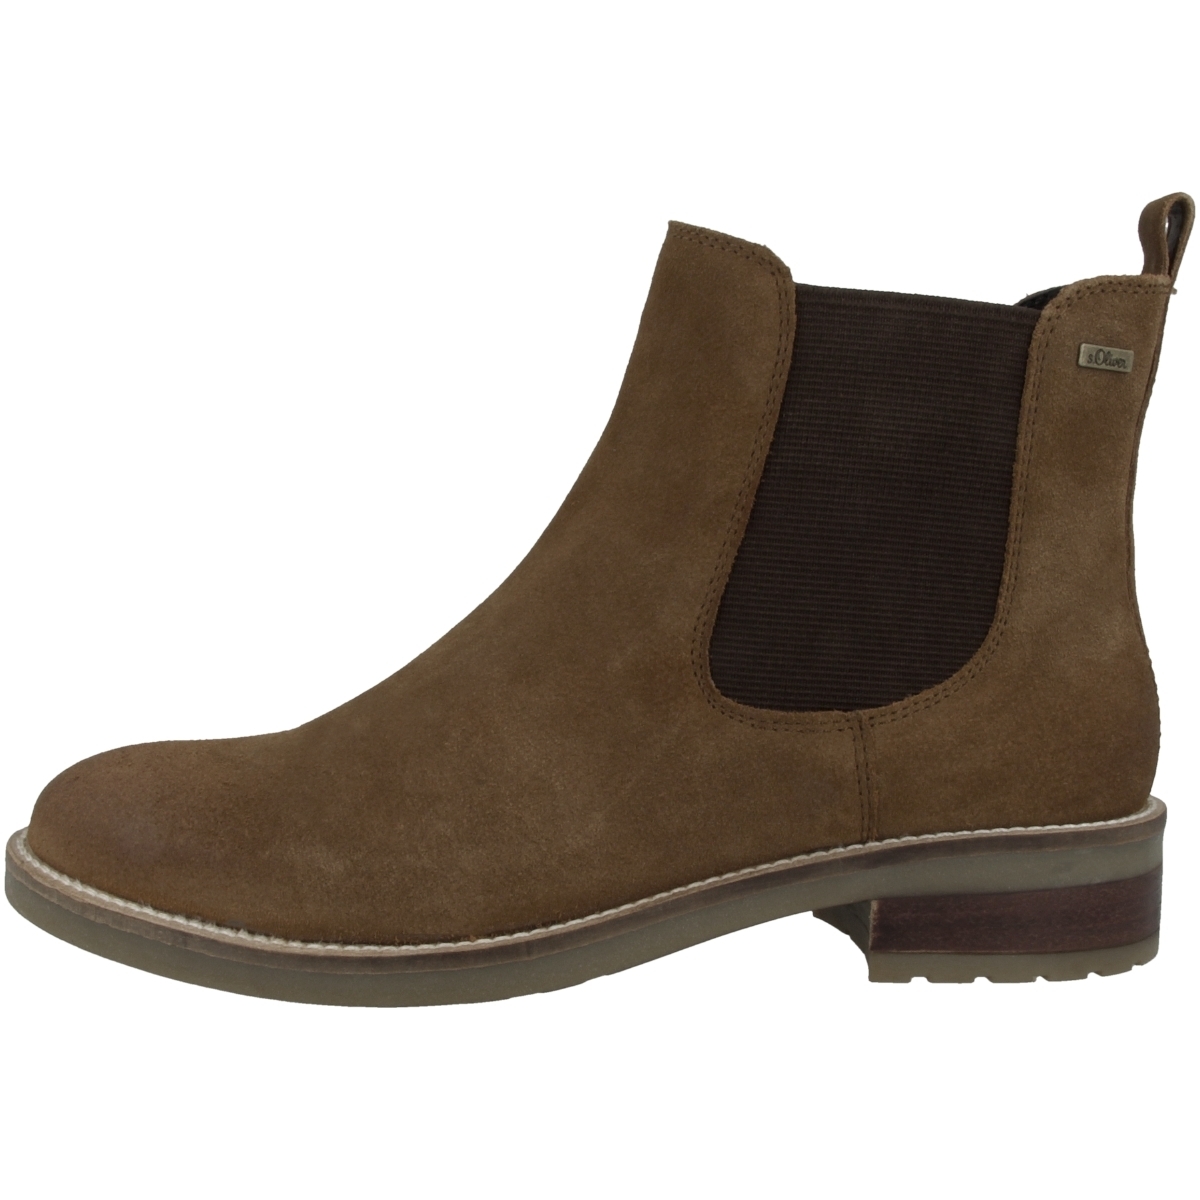 s.Oliver 5-25315-27 Chelsea Boots braun